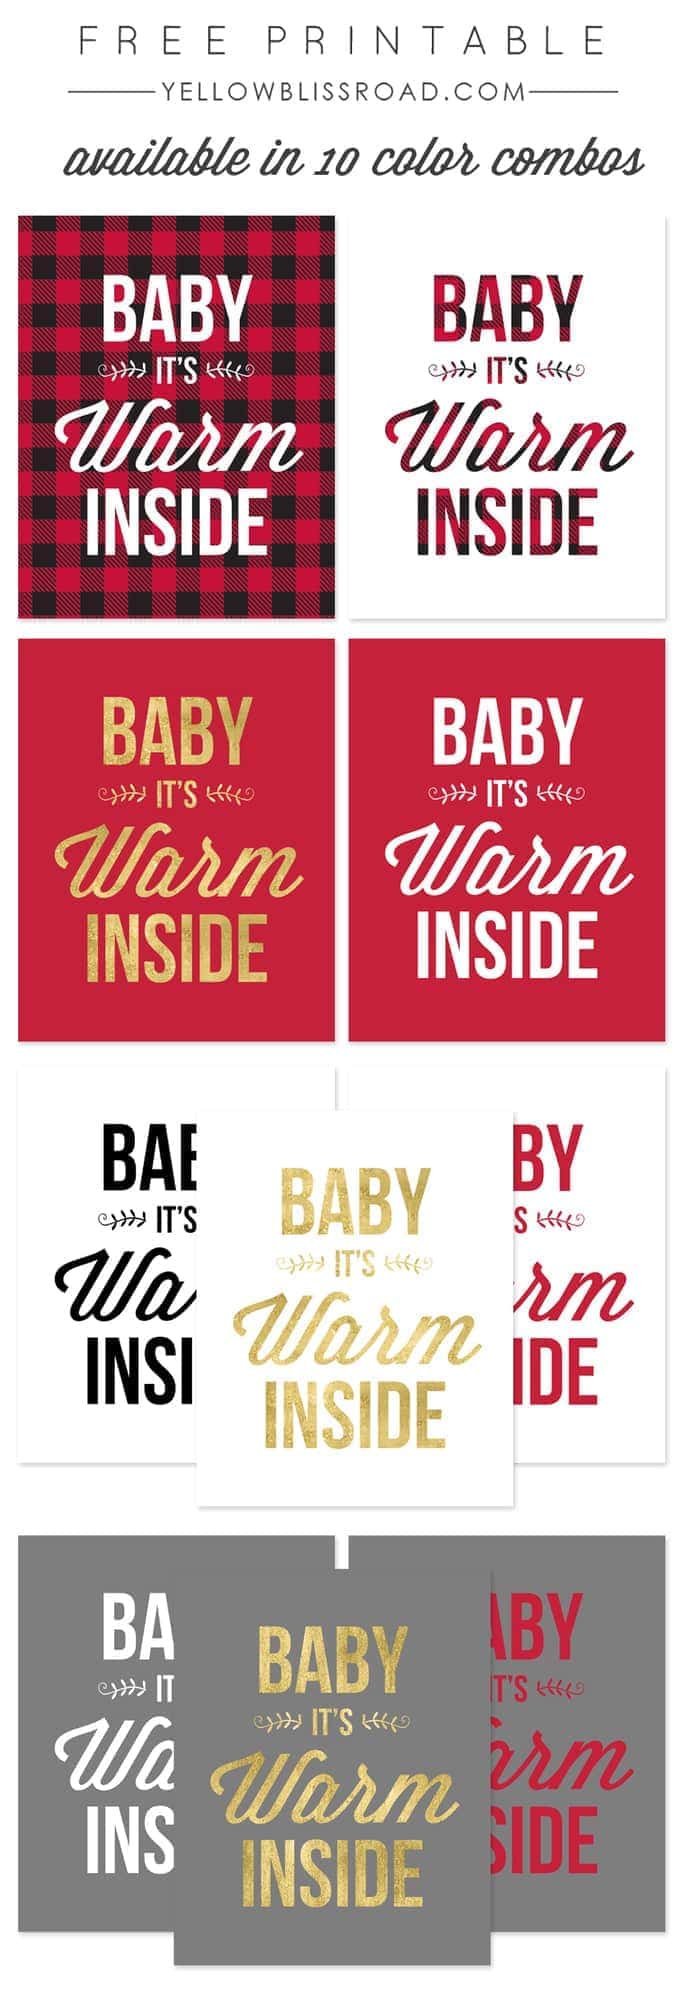 Free Printable - Baby It's Warm Inside - available in 10 color combos